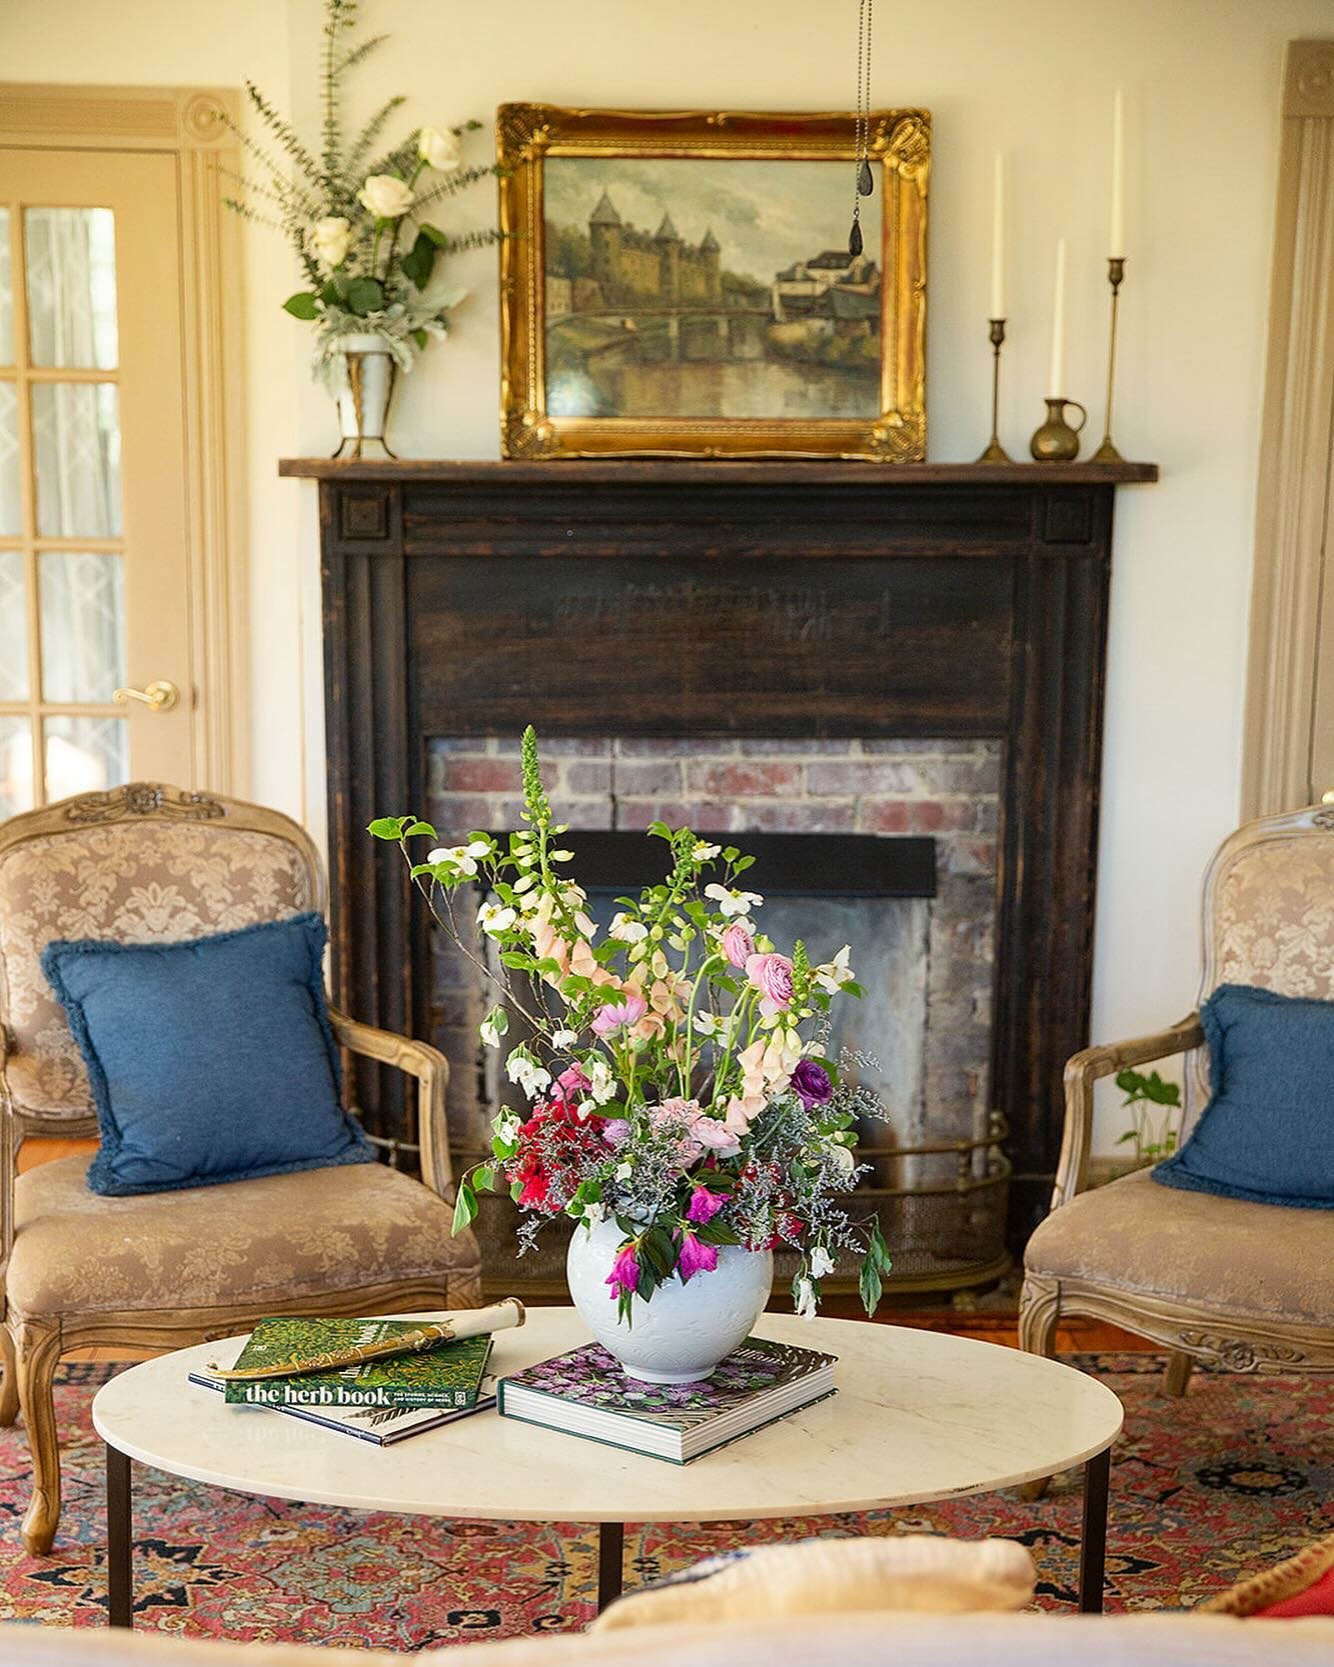 #edgewoodfarmhouse 1910
Pictured: One of eight fireplaces in the house. Still actively used. Original mantel and brick is still in tack. 
#artwork sourced in an #antiqueshop in Germany.
📸 @mollietobiasphotography 
#lazyfoxlavenderfarm #cameronnc #mo